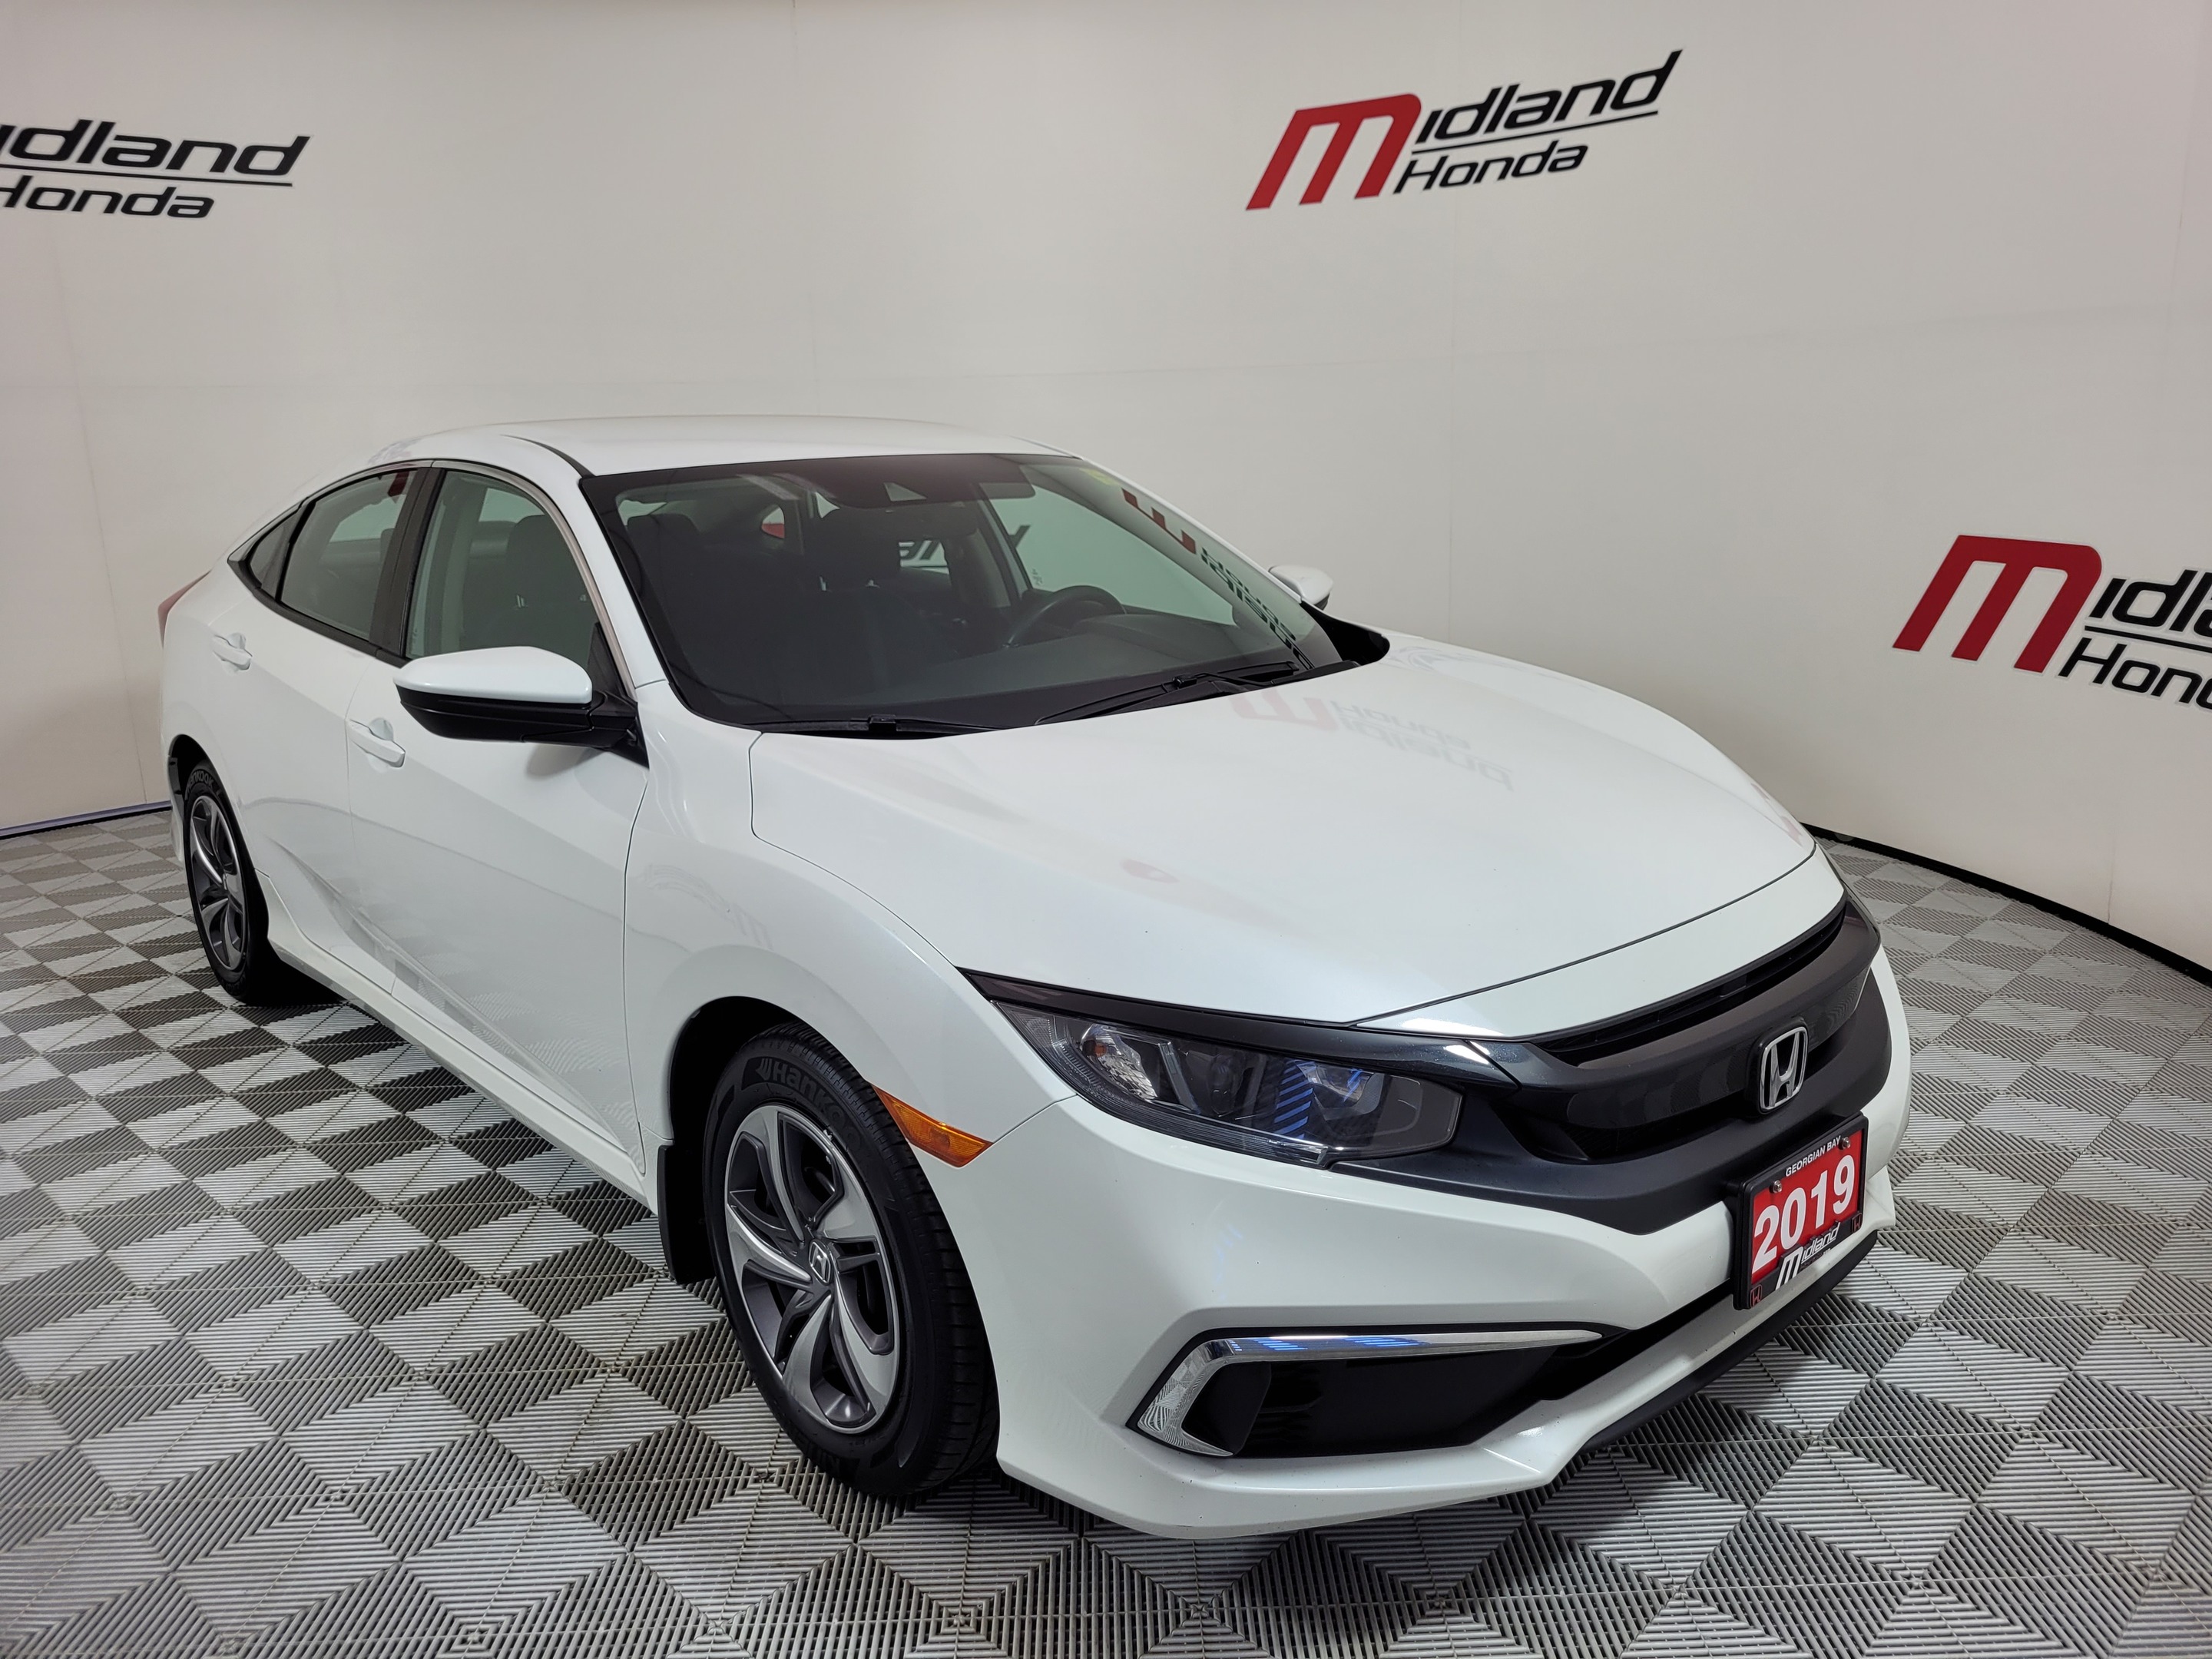 2019 Honda Civic LX | 6 Speed Manual | 1 Owner Accident Free